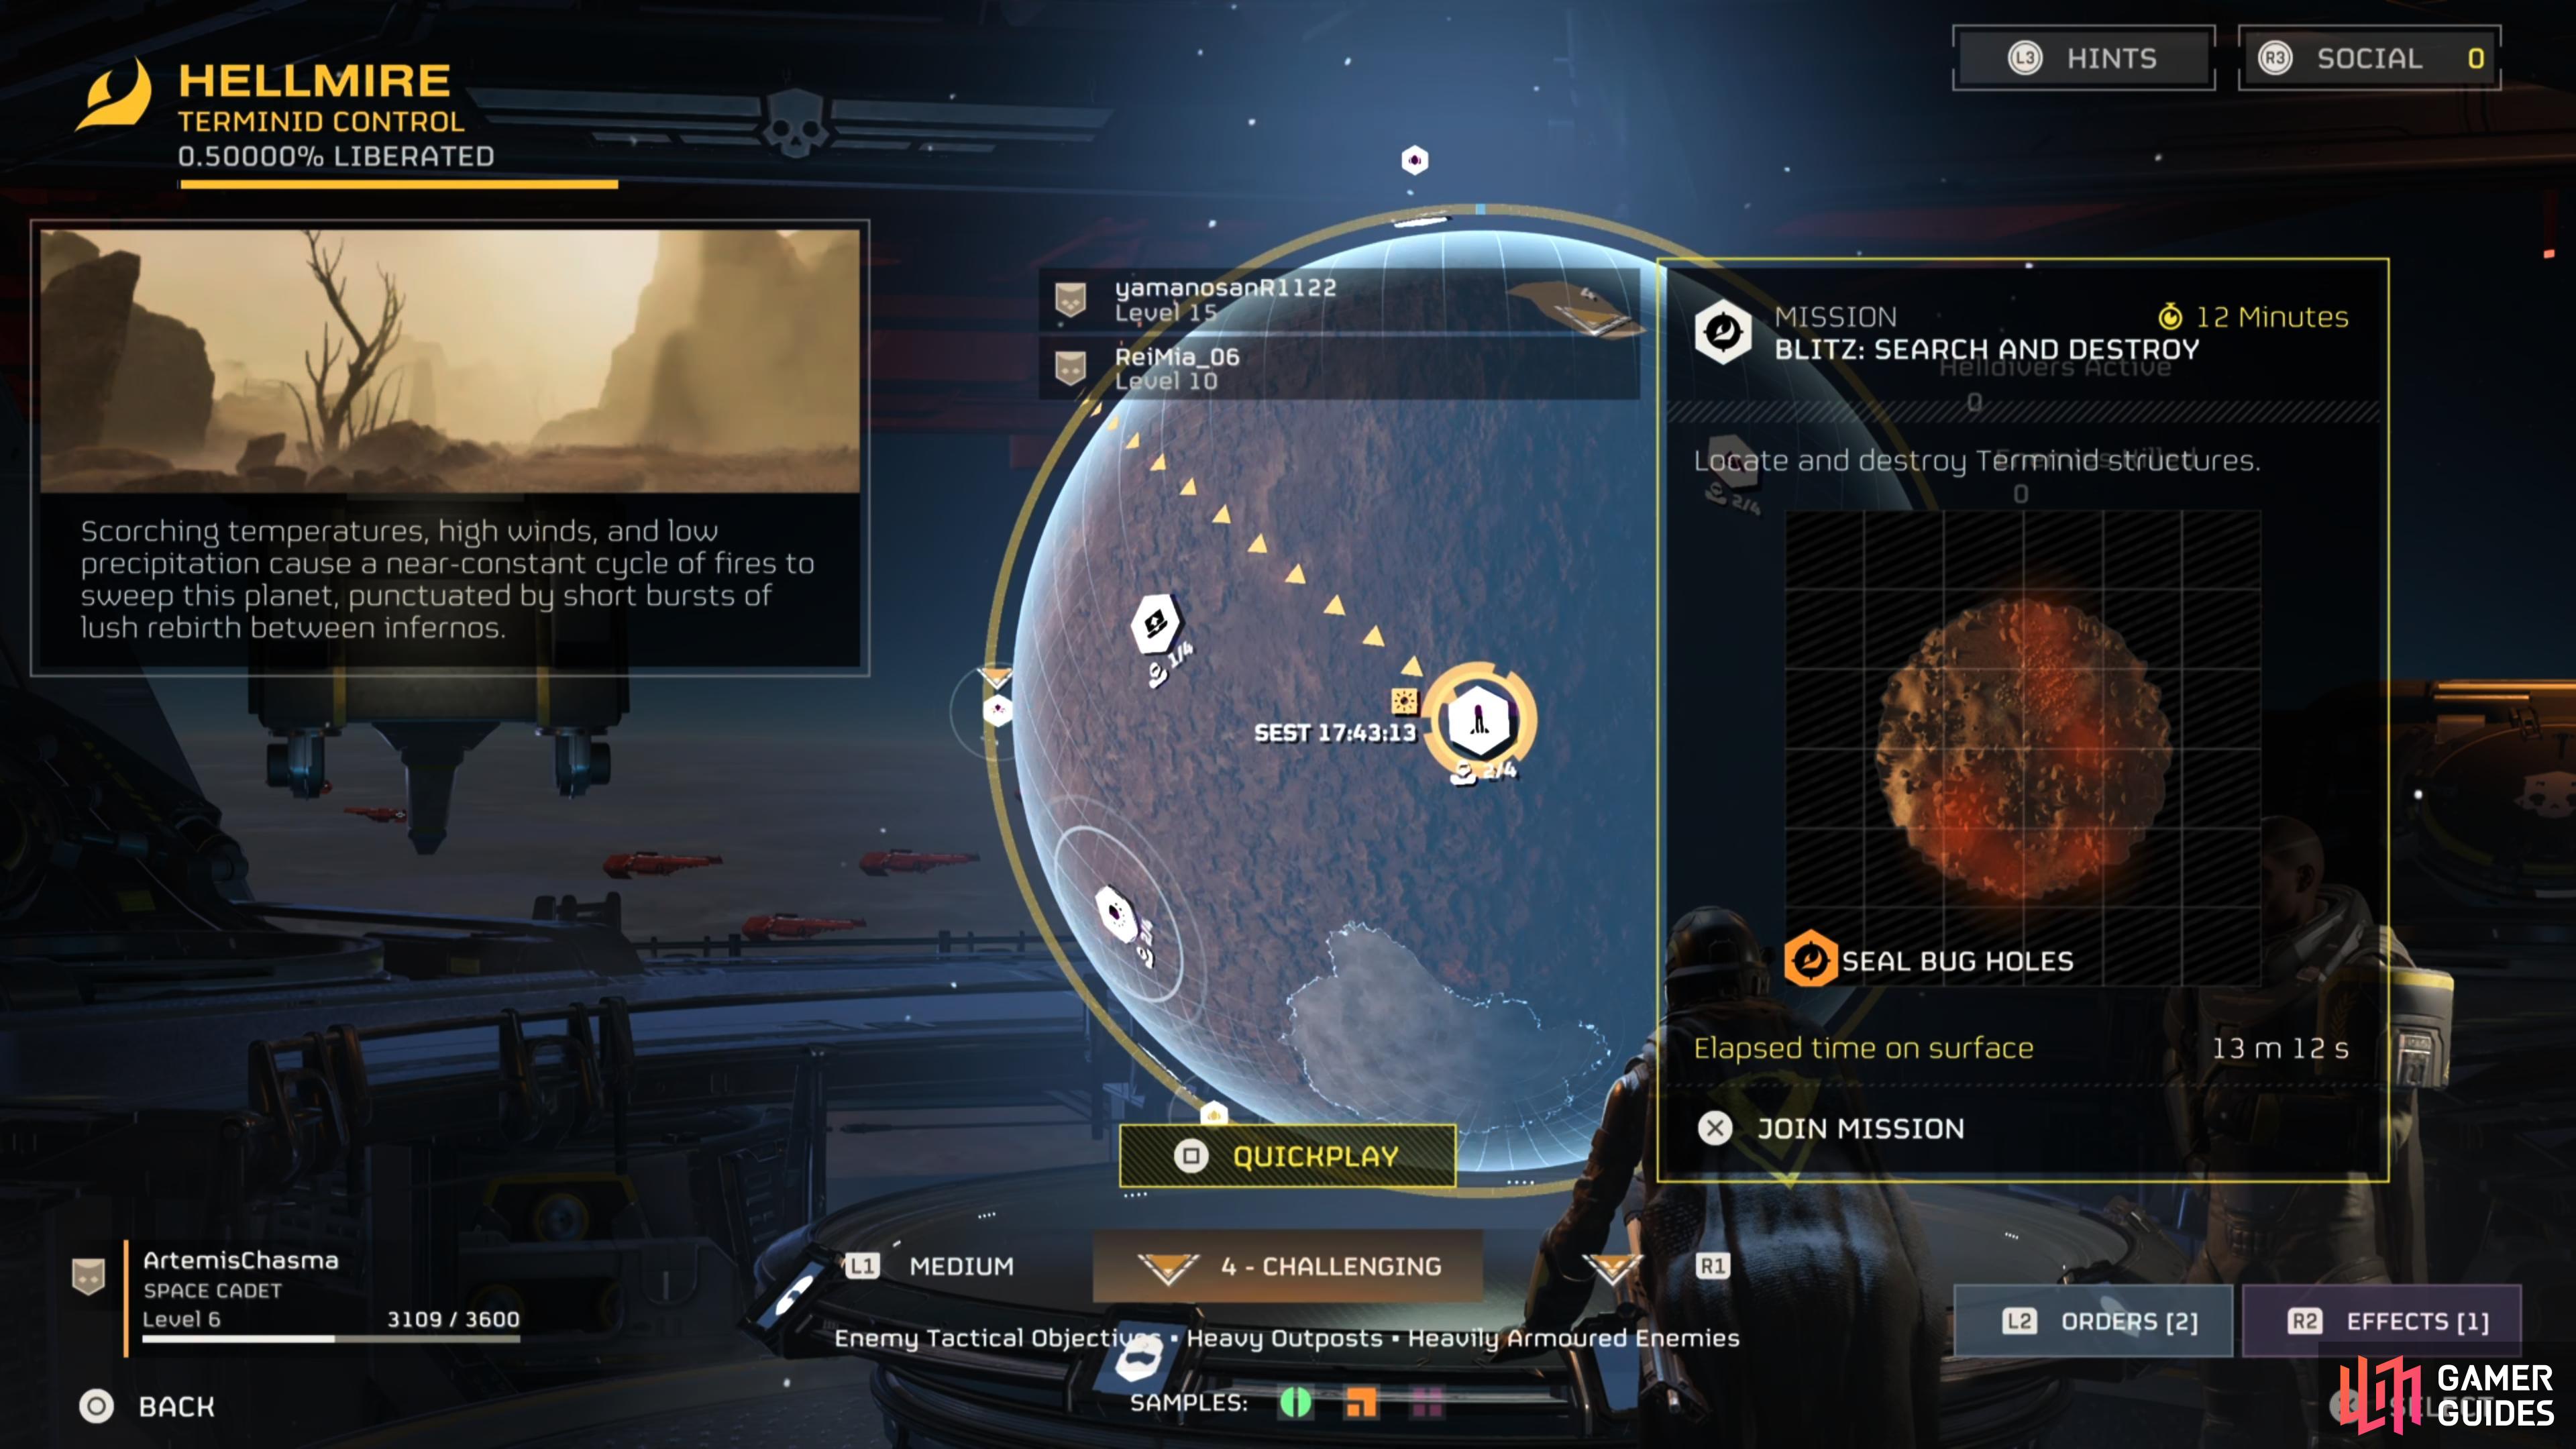 You can find the stalker hive tactical sub-objective in Search and Destroy missions.